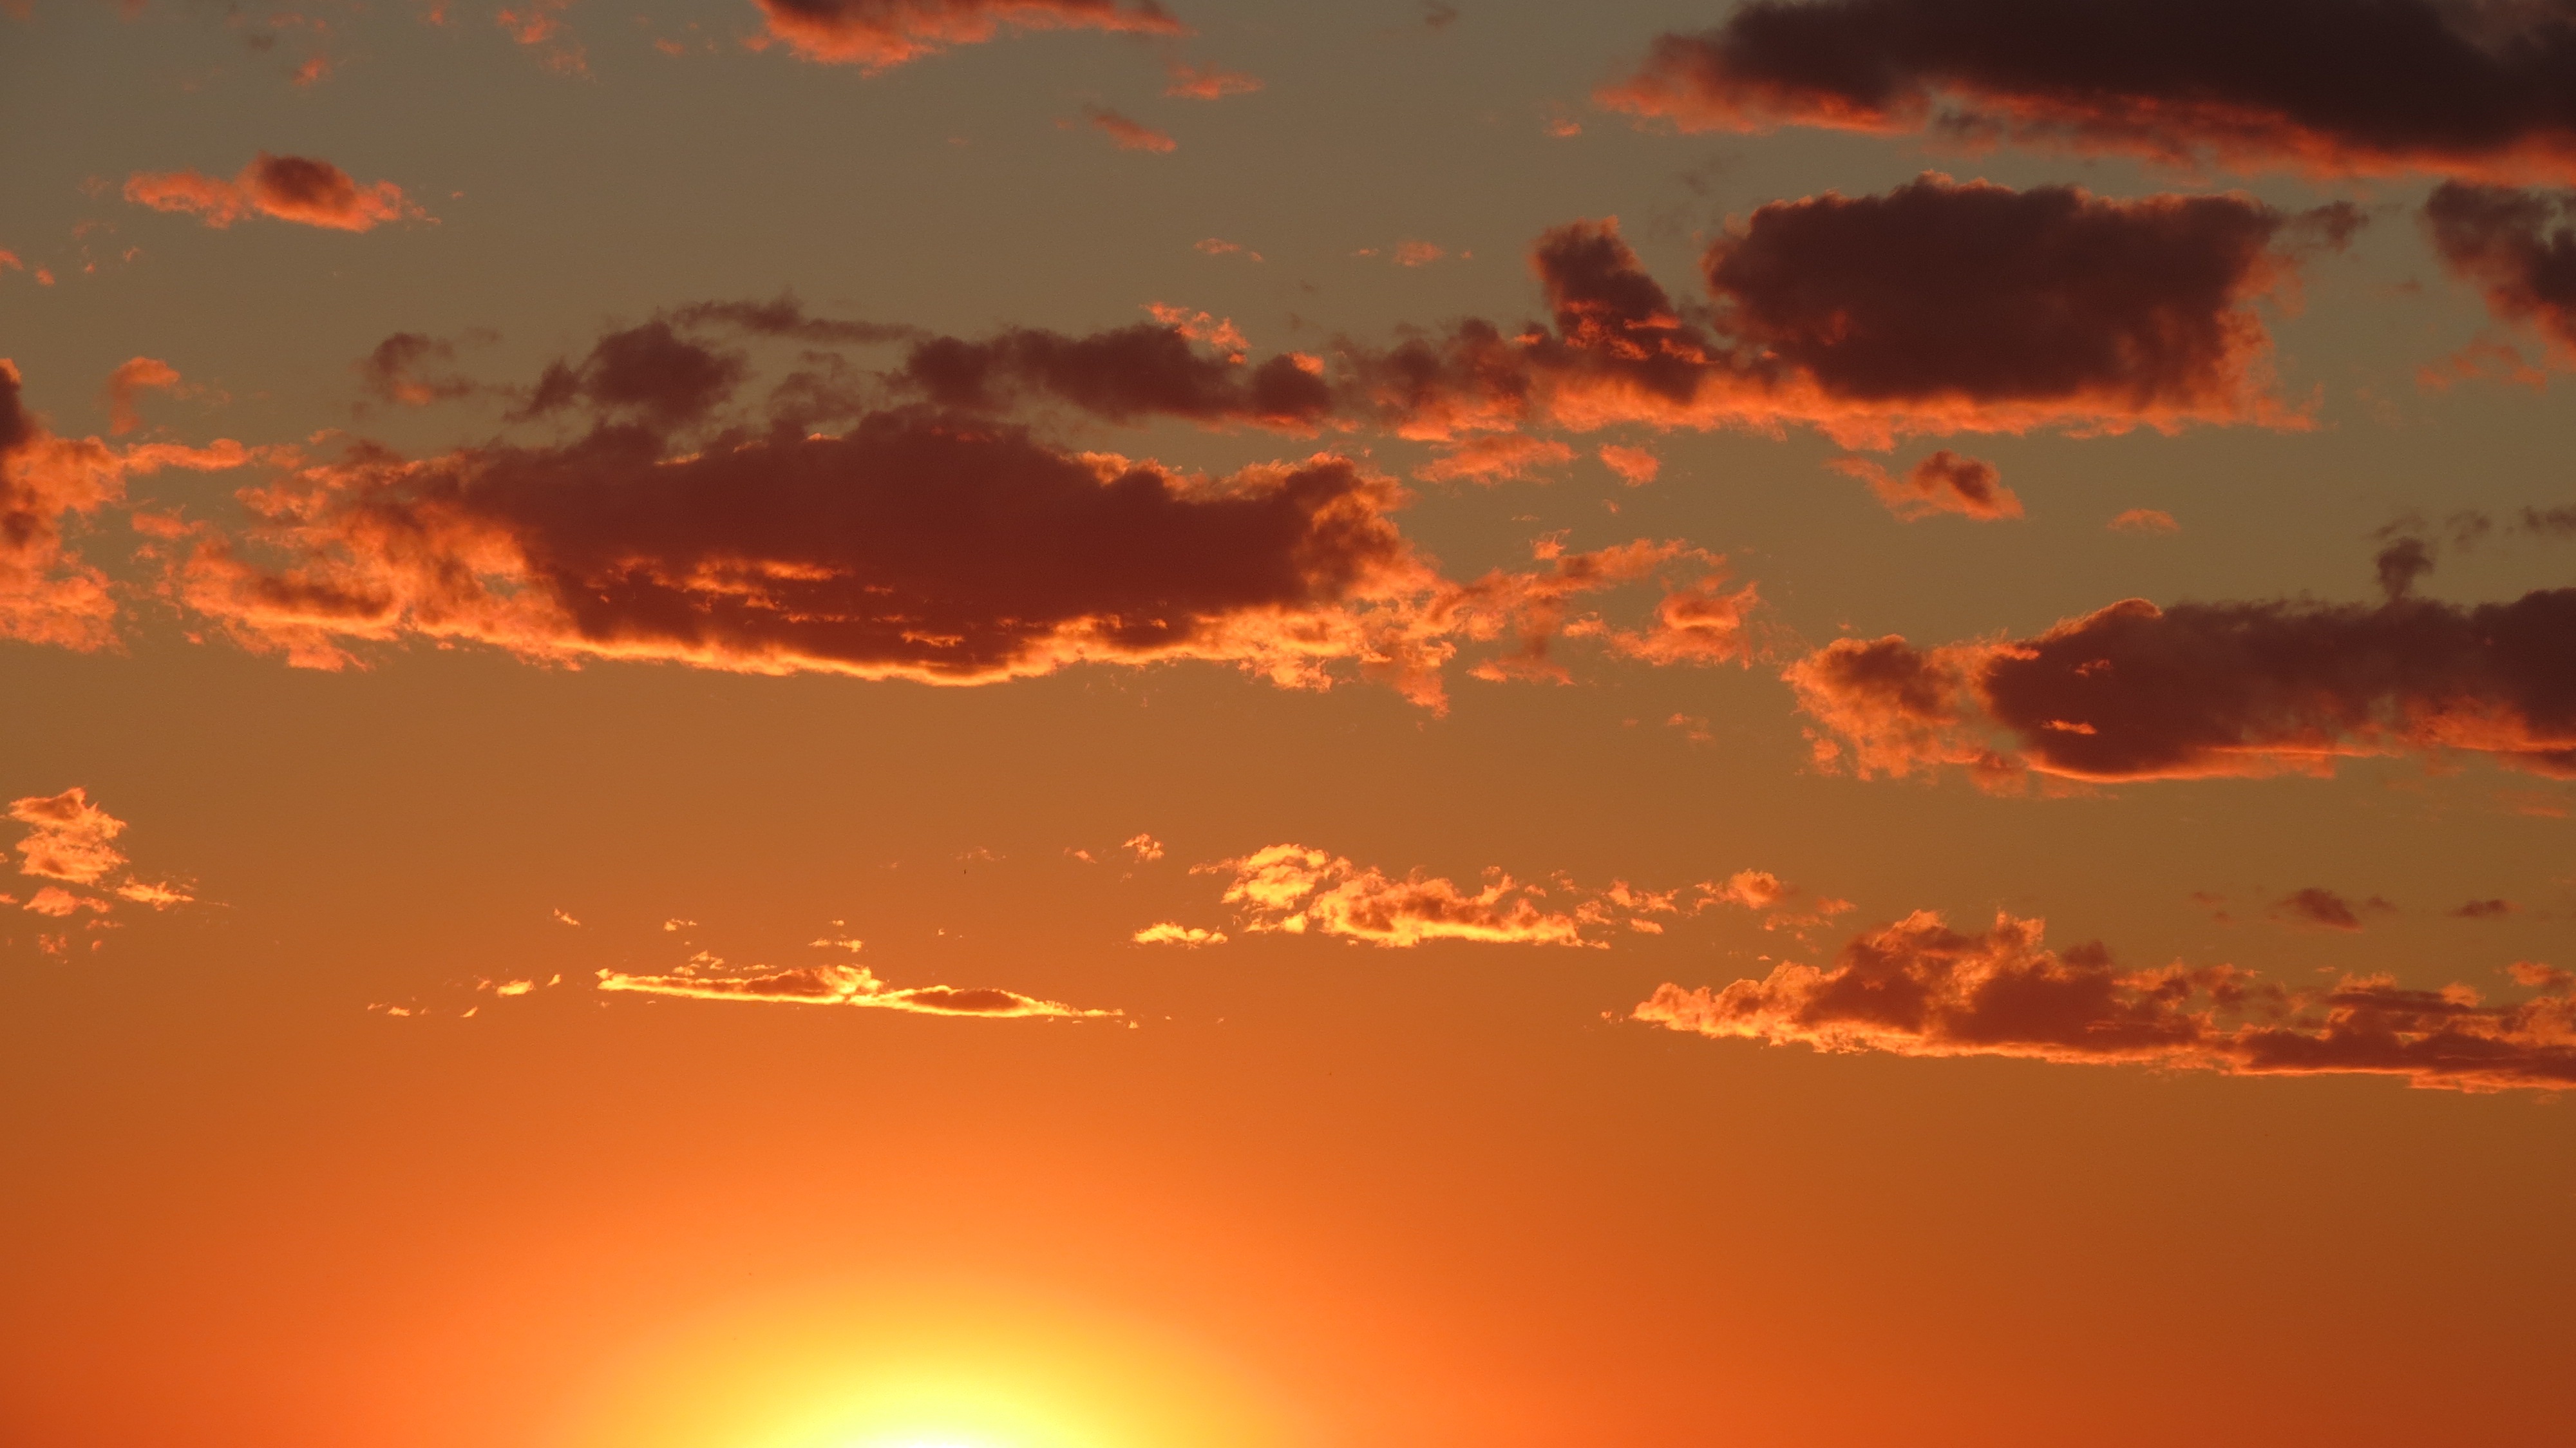 Sunset Sky weather view free image download